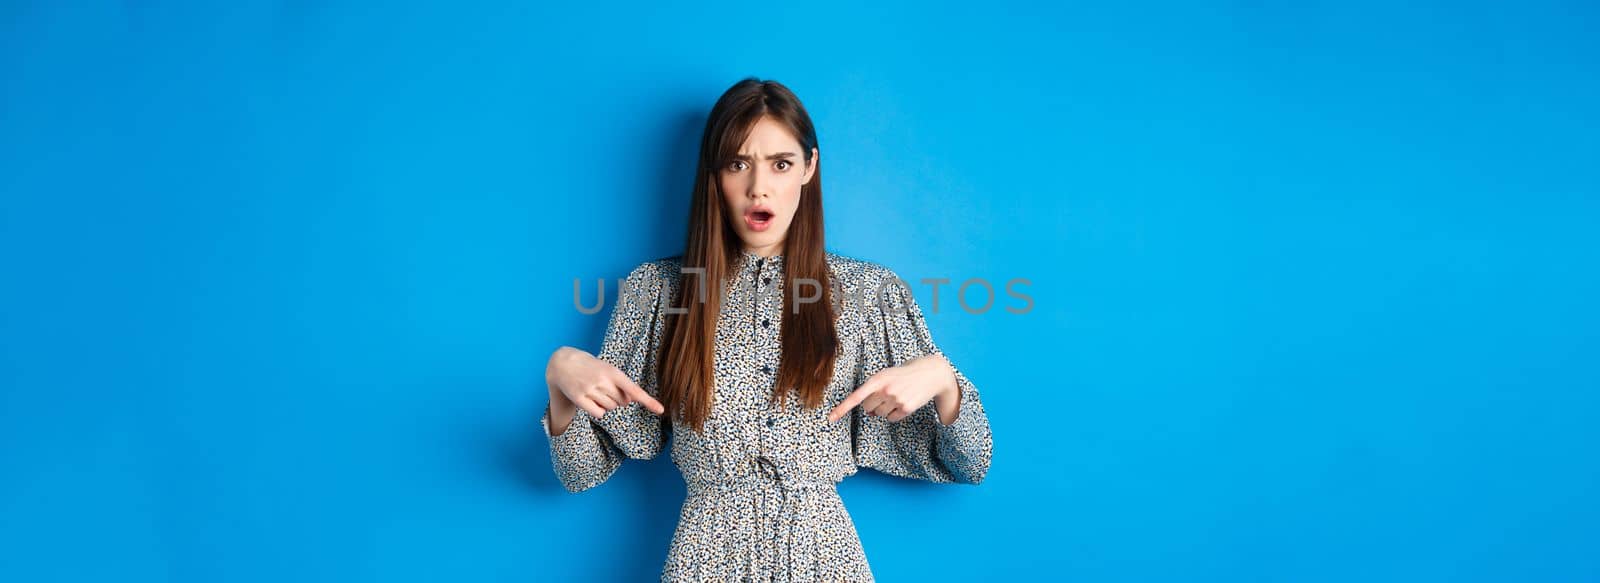 Shocked and offended young woman in dress frowning, gasping and pointing fingers down at insulting promo, standing on blue background.